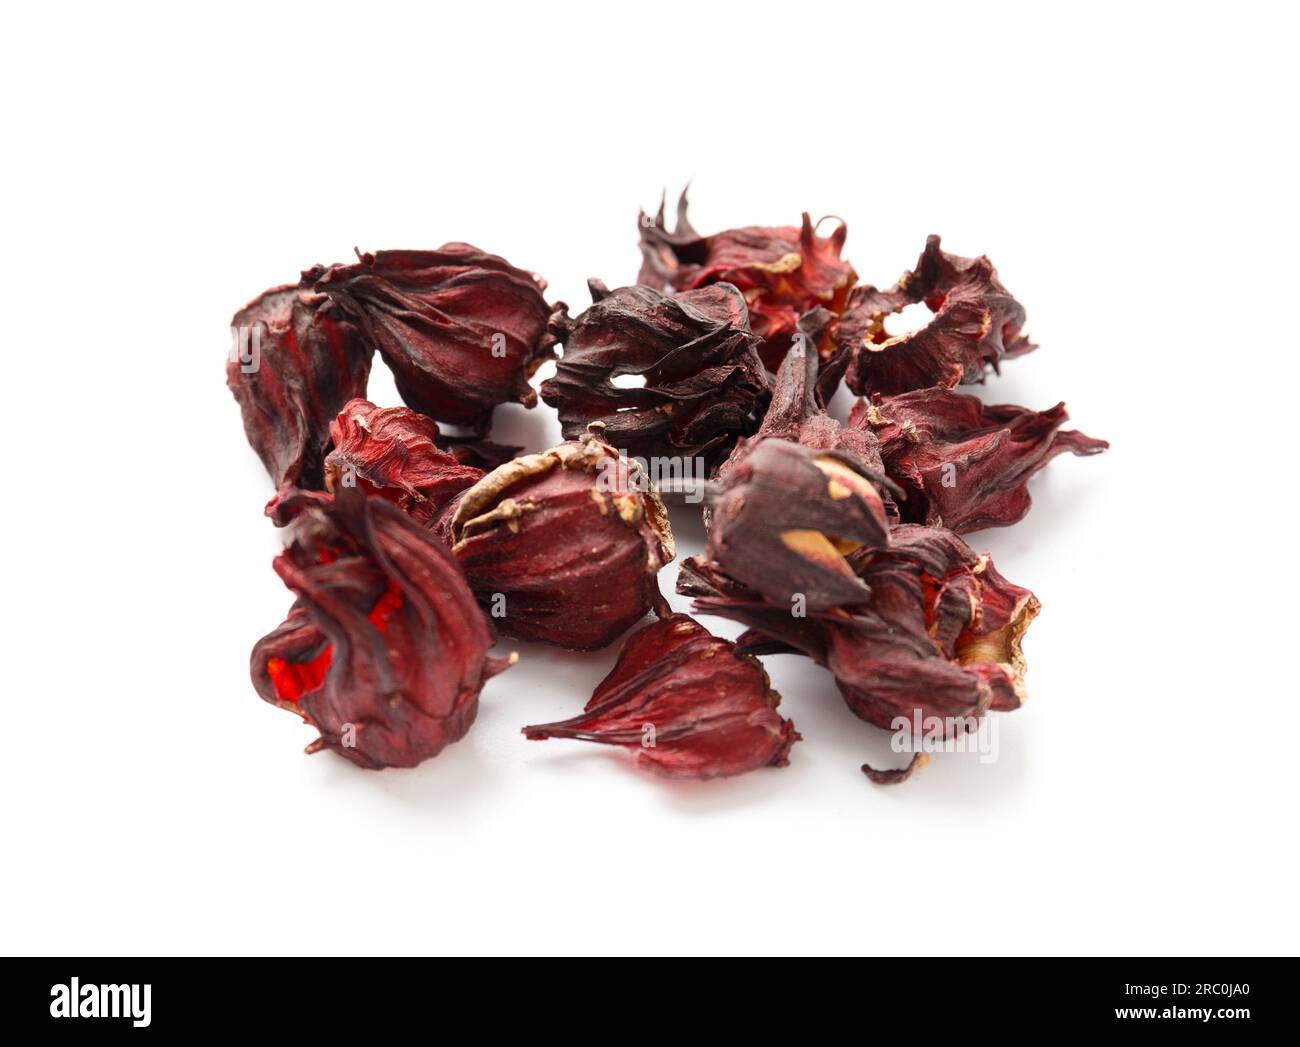 Hibiscus tea on a white background close-up. Dry flowers of red hibiscus on isolation. A handful of hibiscus for making tea. Stock Photo